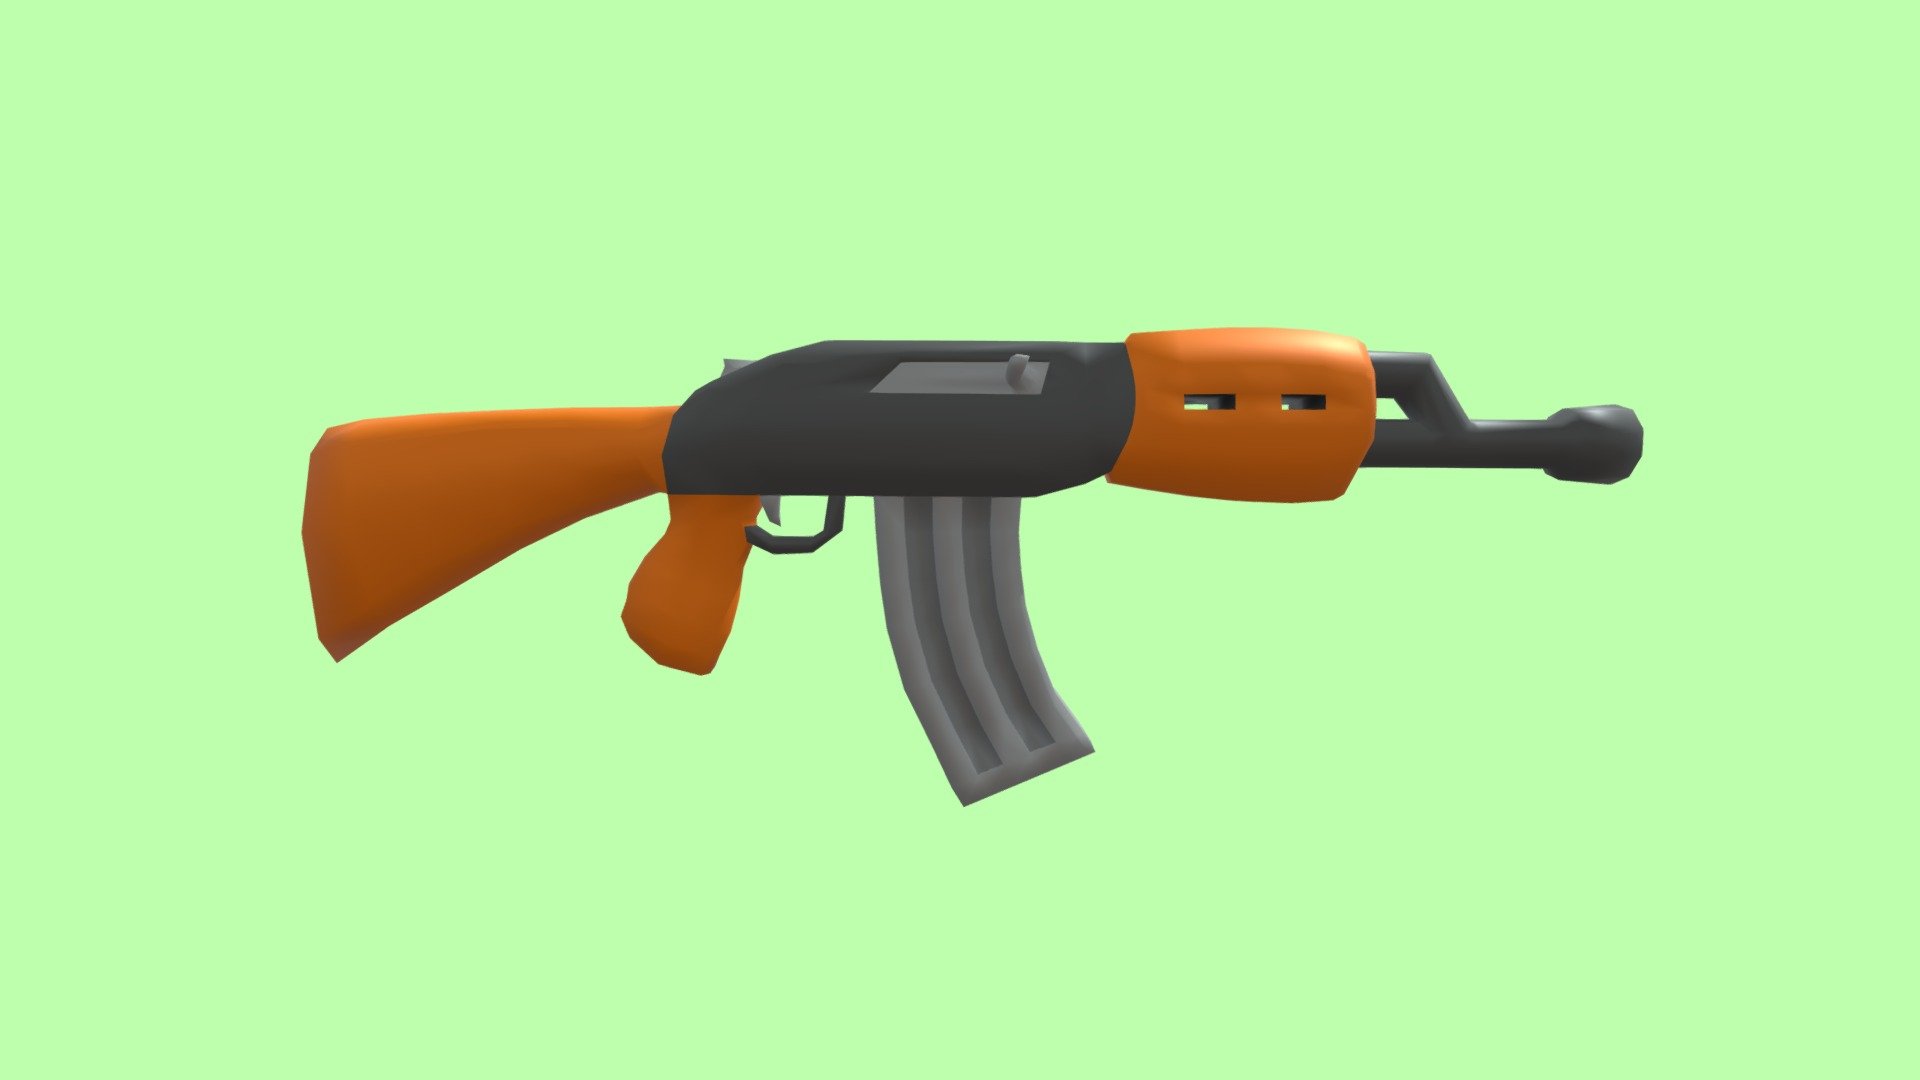 A Low-poly AK47.

Main file is a .fbx format
Model includes bones for animation and a 1024x1024 texture.
Demo animations are included to showcase moving parts 3d model